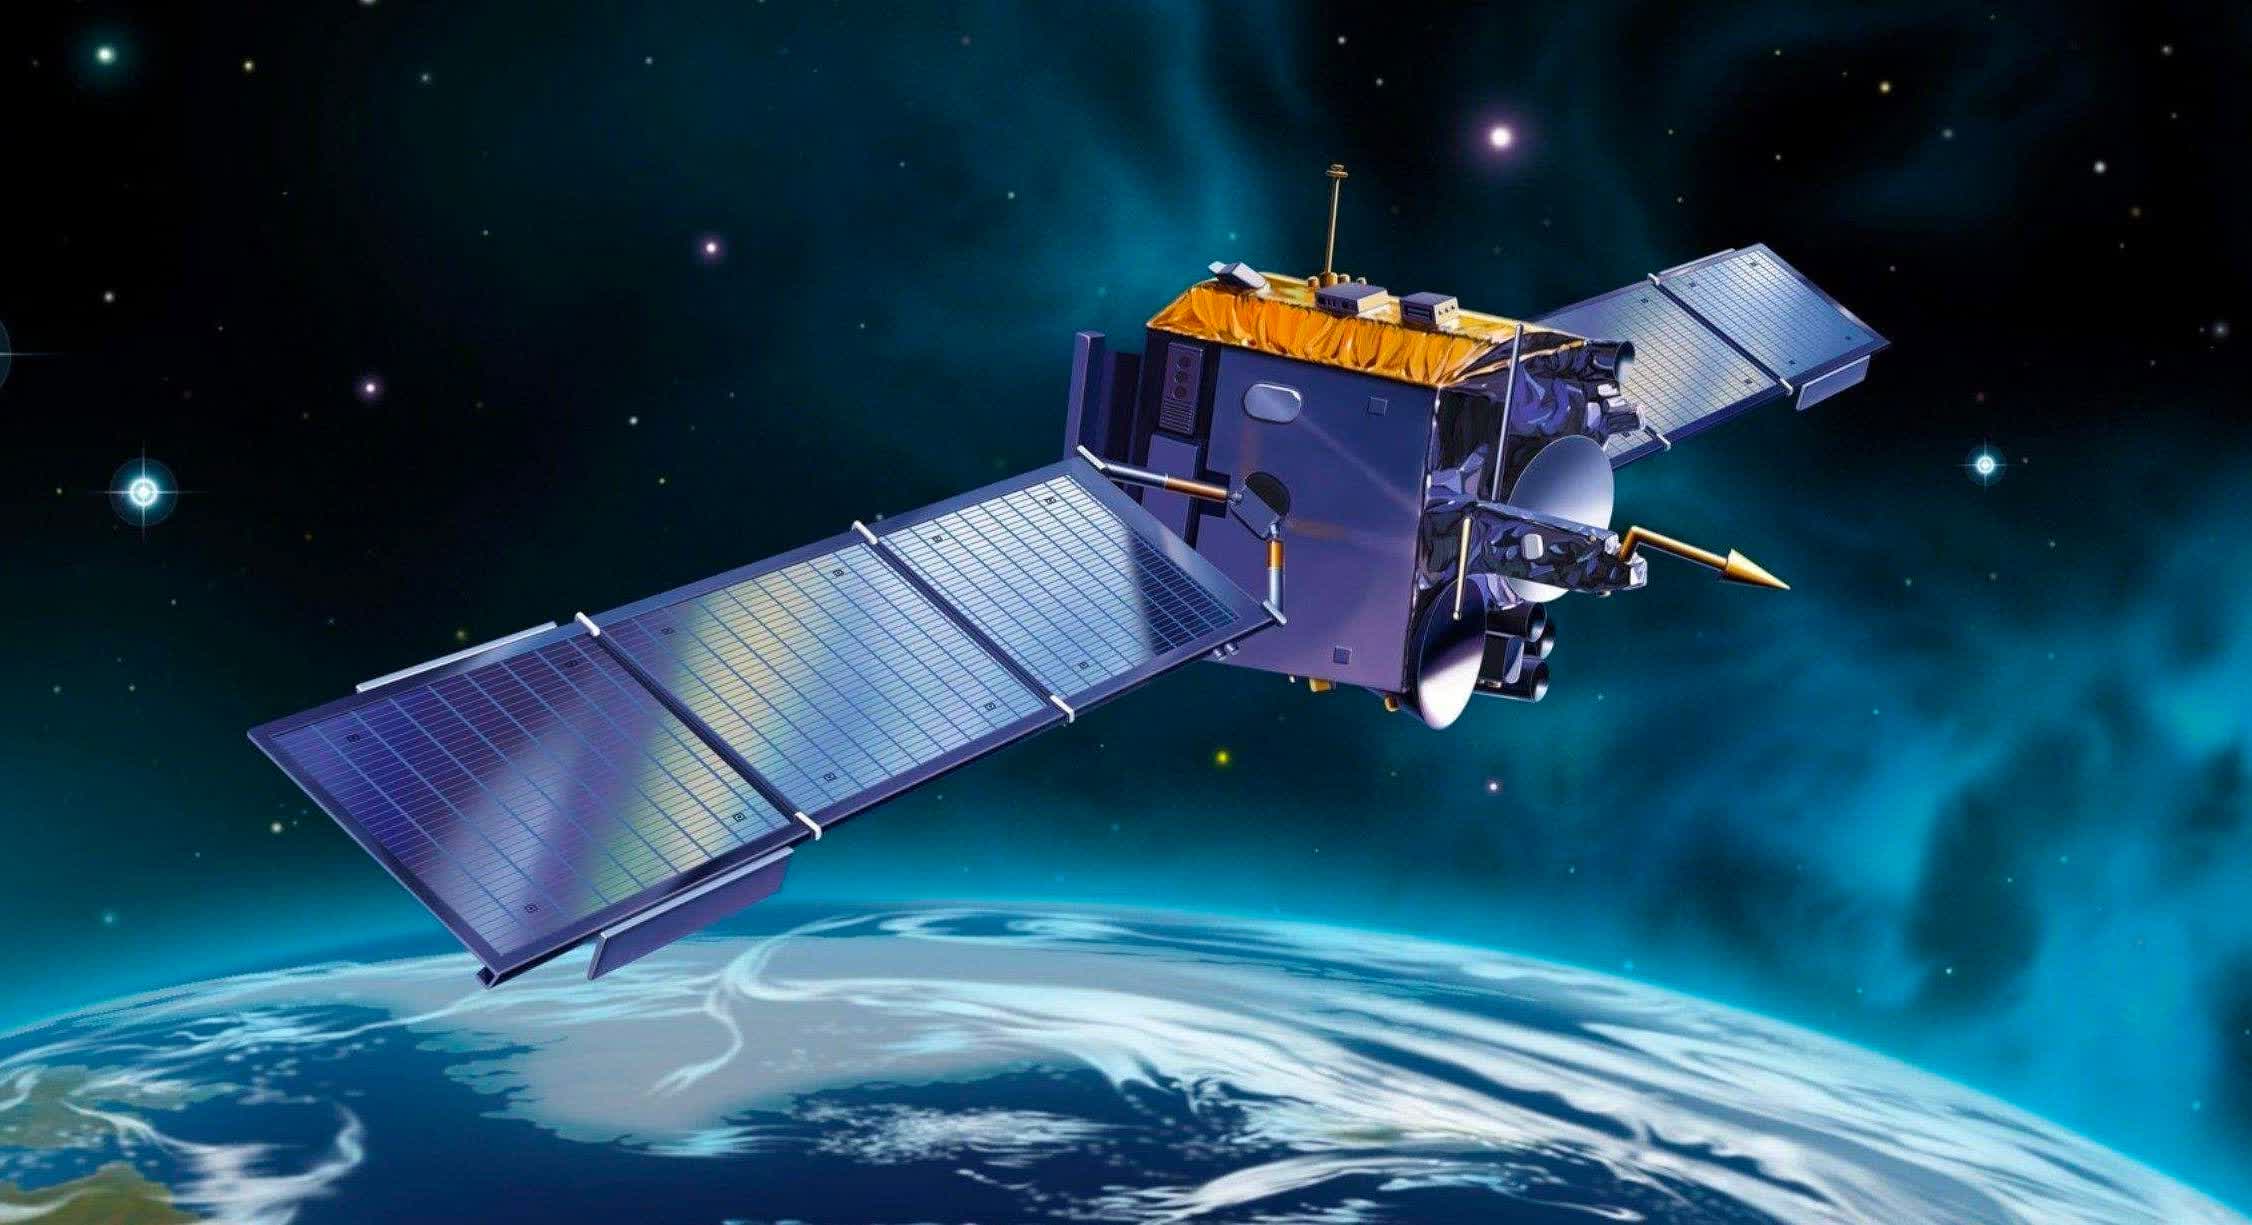 Russia and China successfully transmit two images over satellite using quantum communication